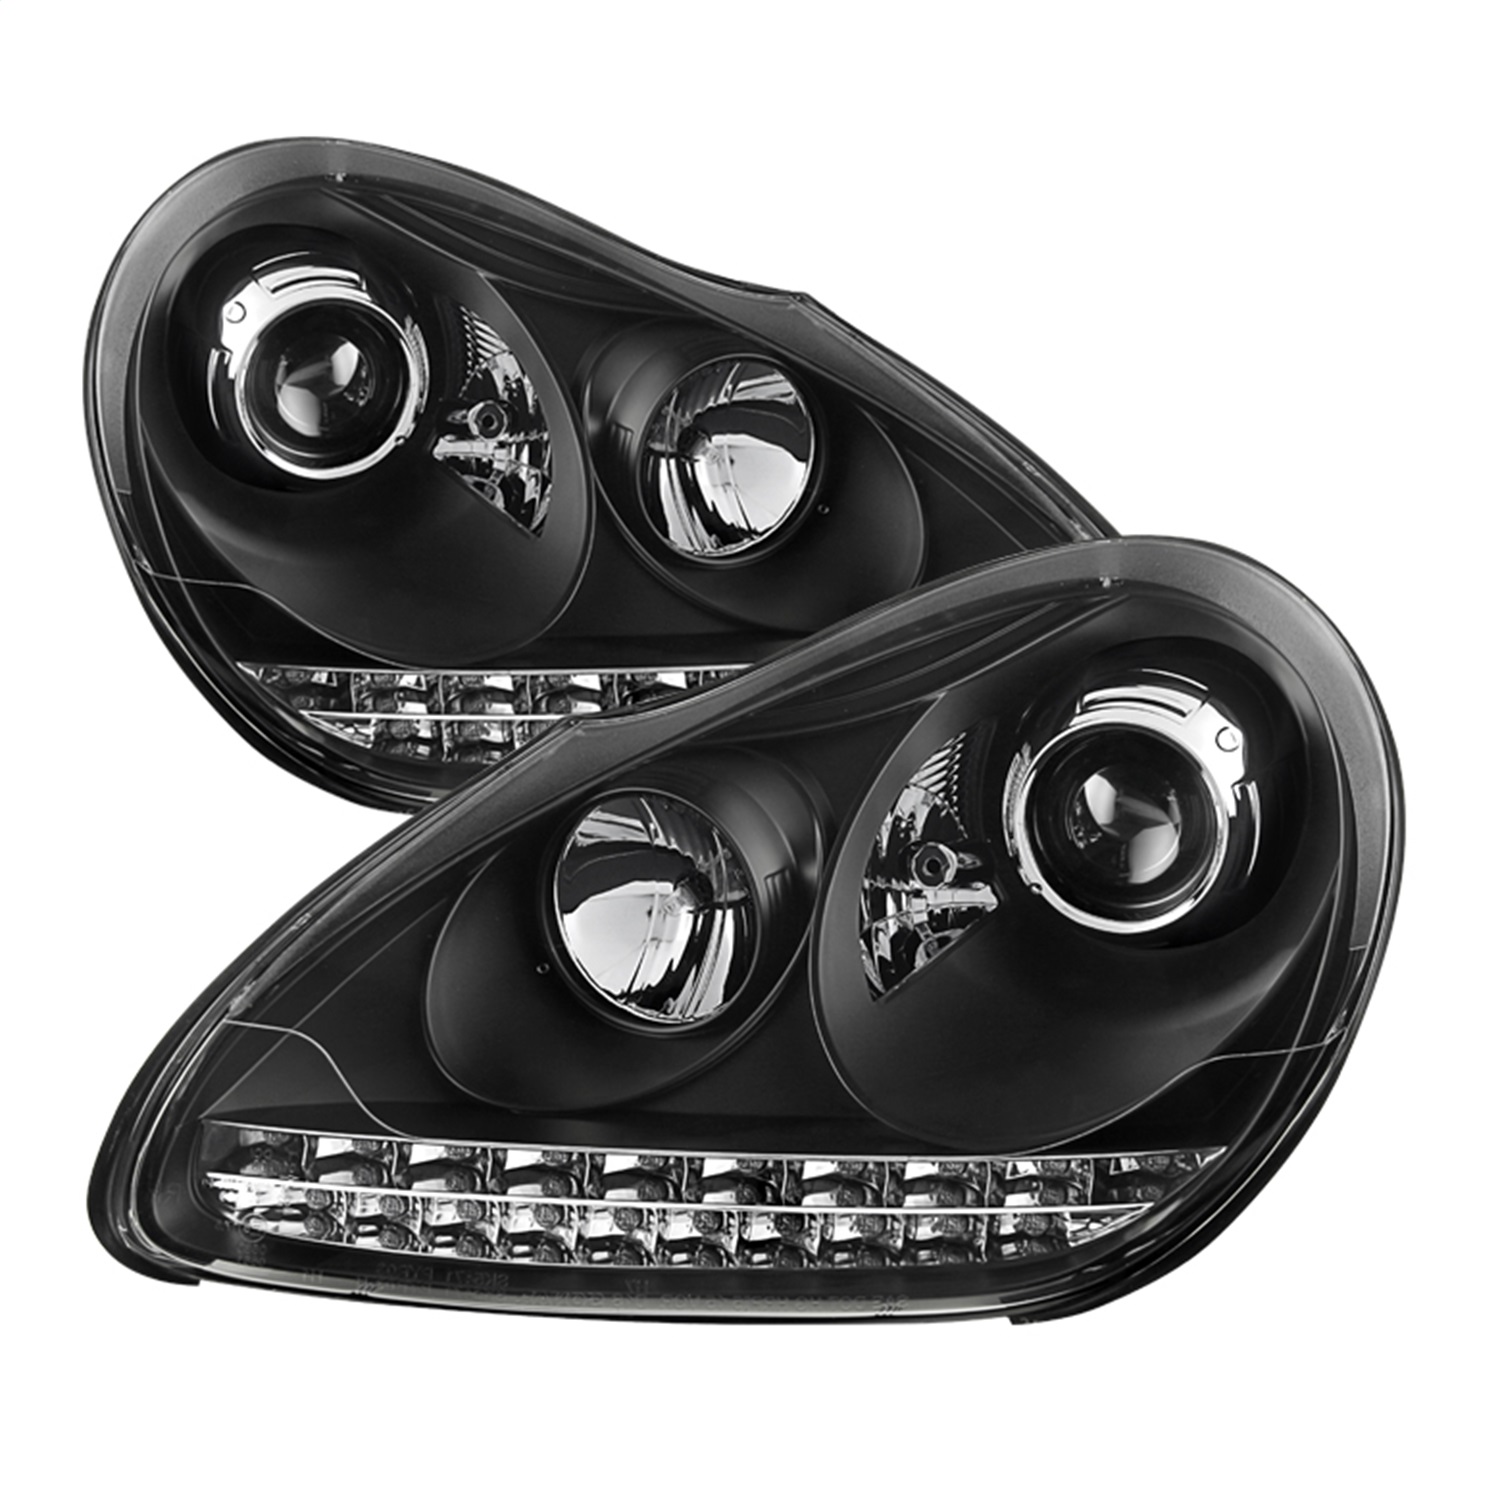 Spyder Auto 5080967 DRL LED Projector Headlights Fits 03-06 Cayenne